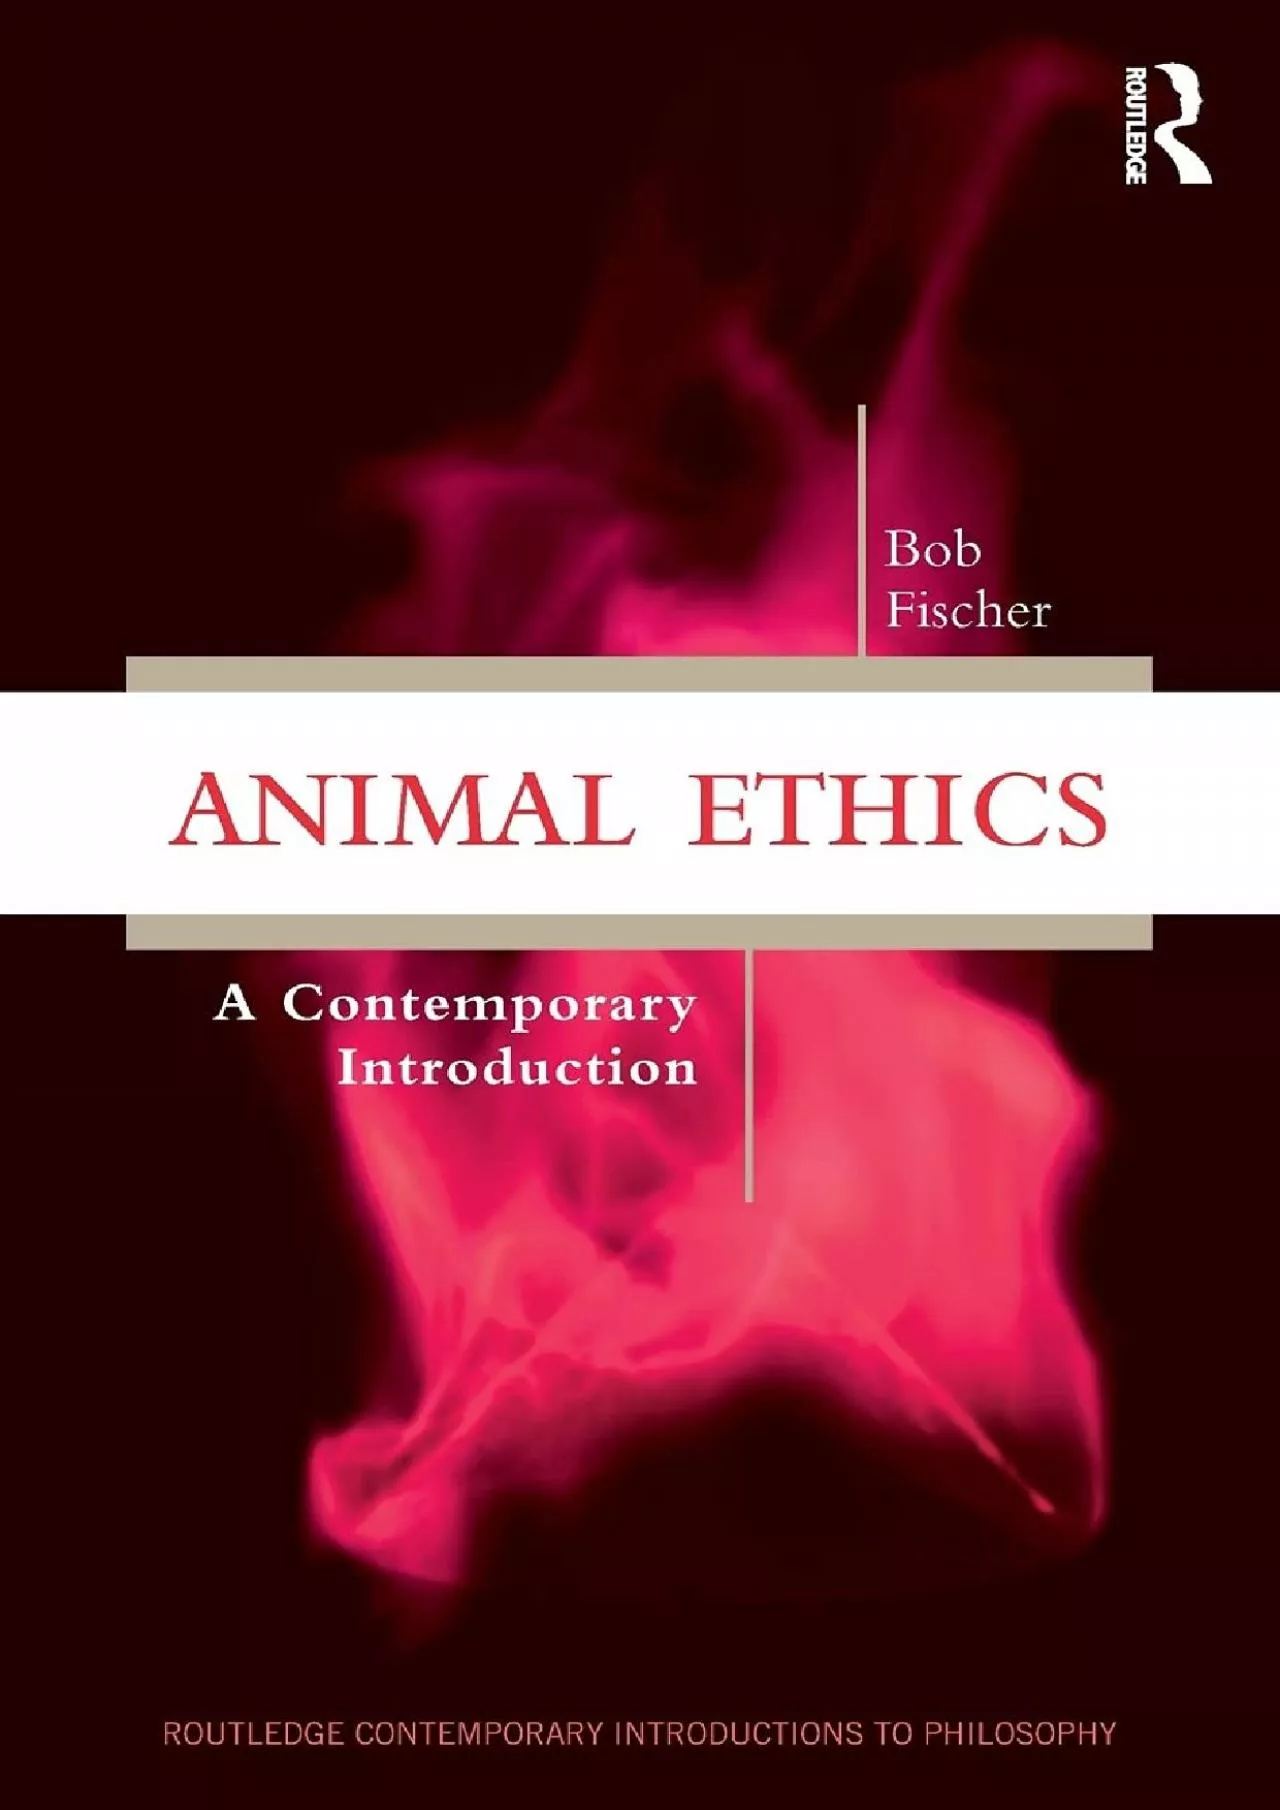 (BOOS)-Animal Ethics: A Contemporary Introduction (Routledge Contemporary Introductions